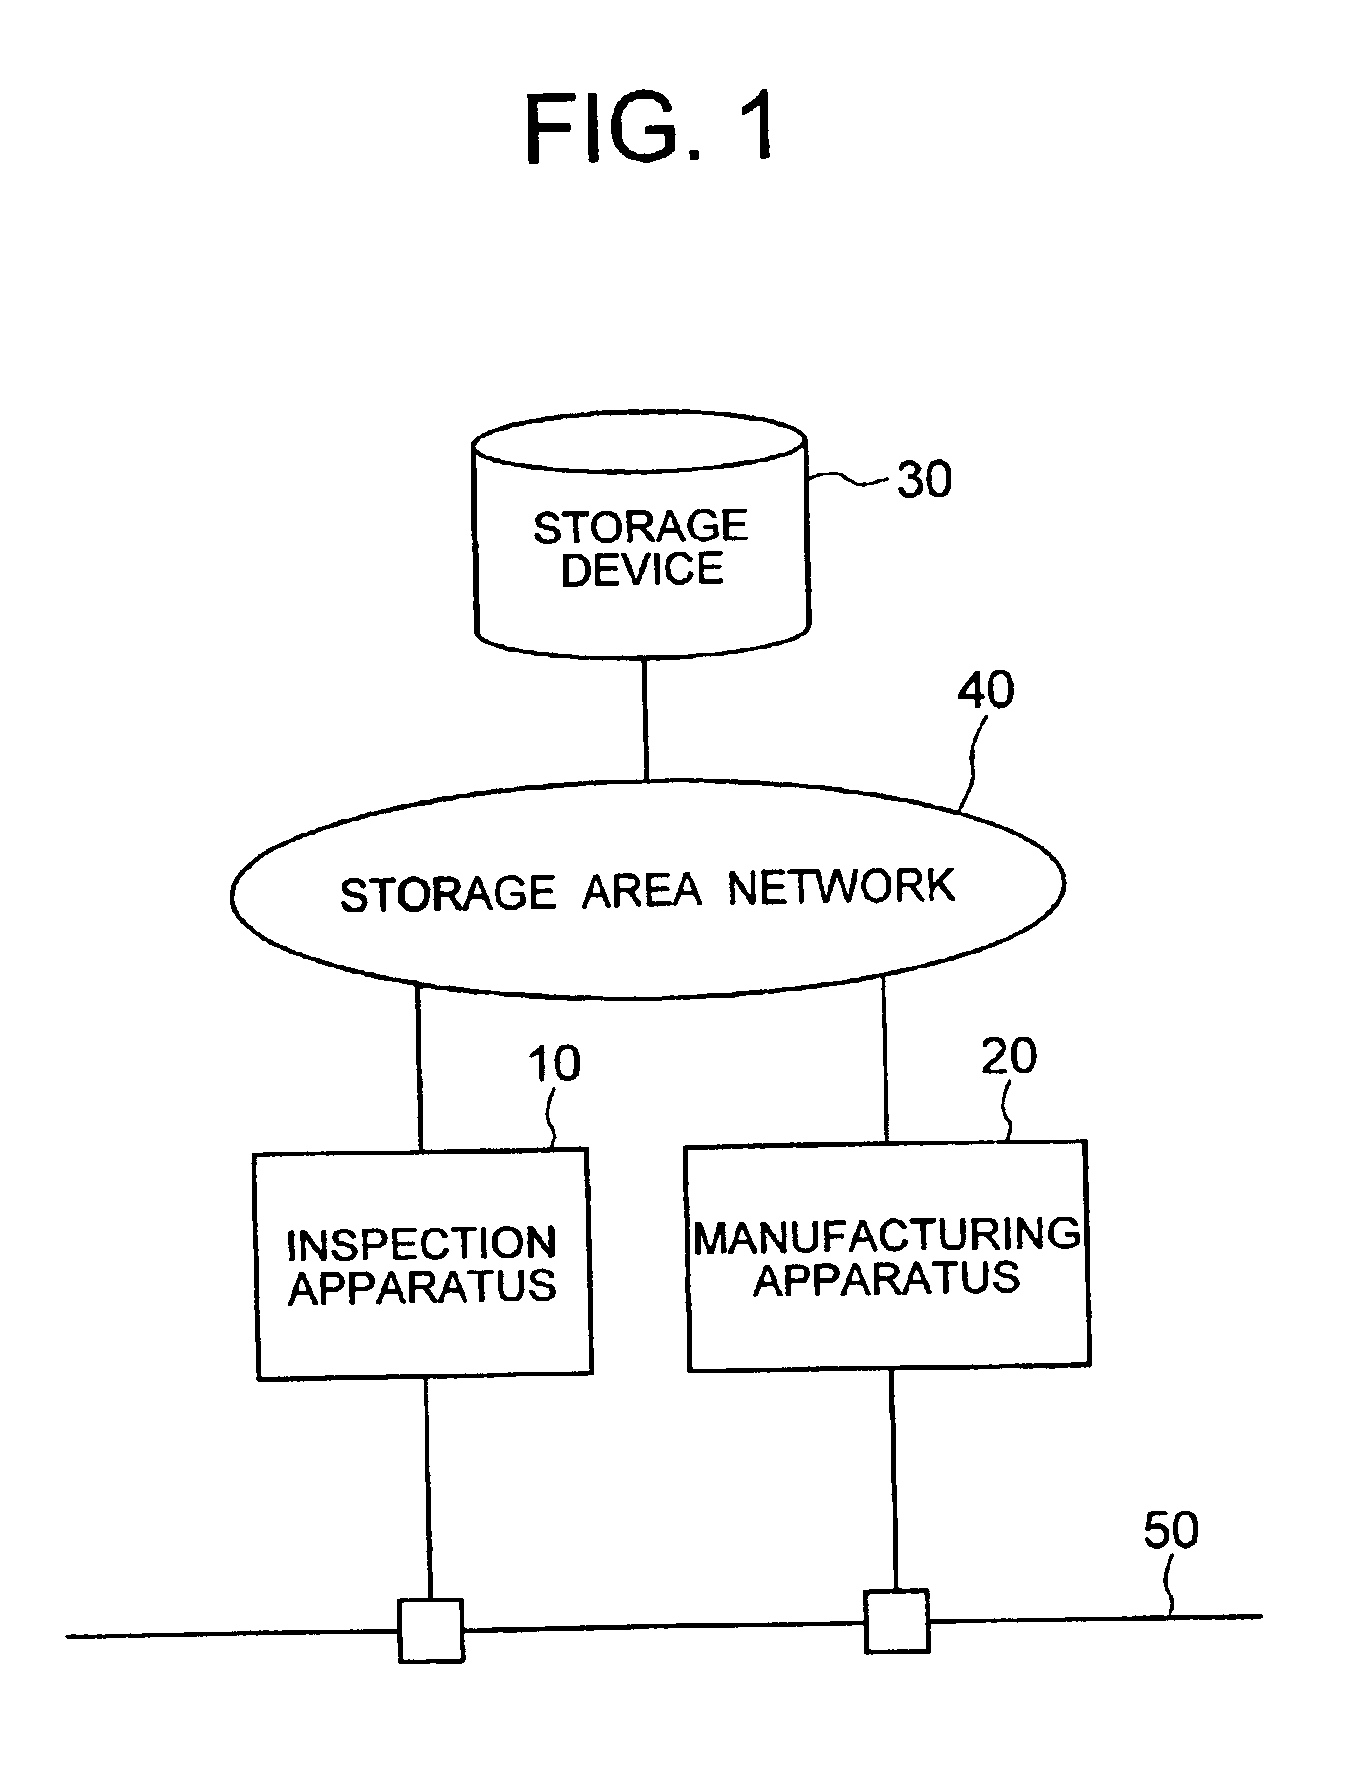 Semiconductor production system